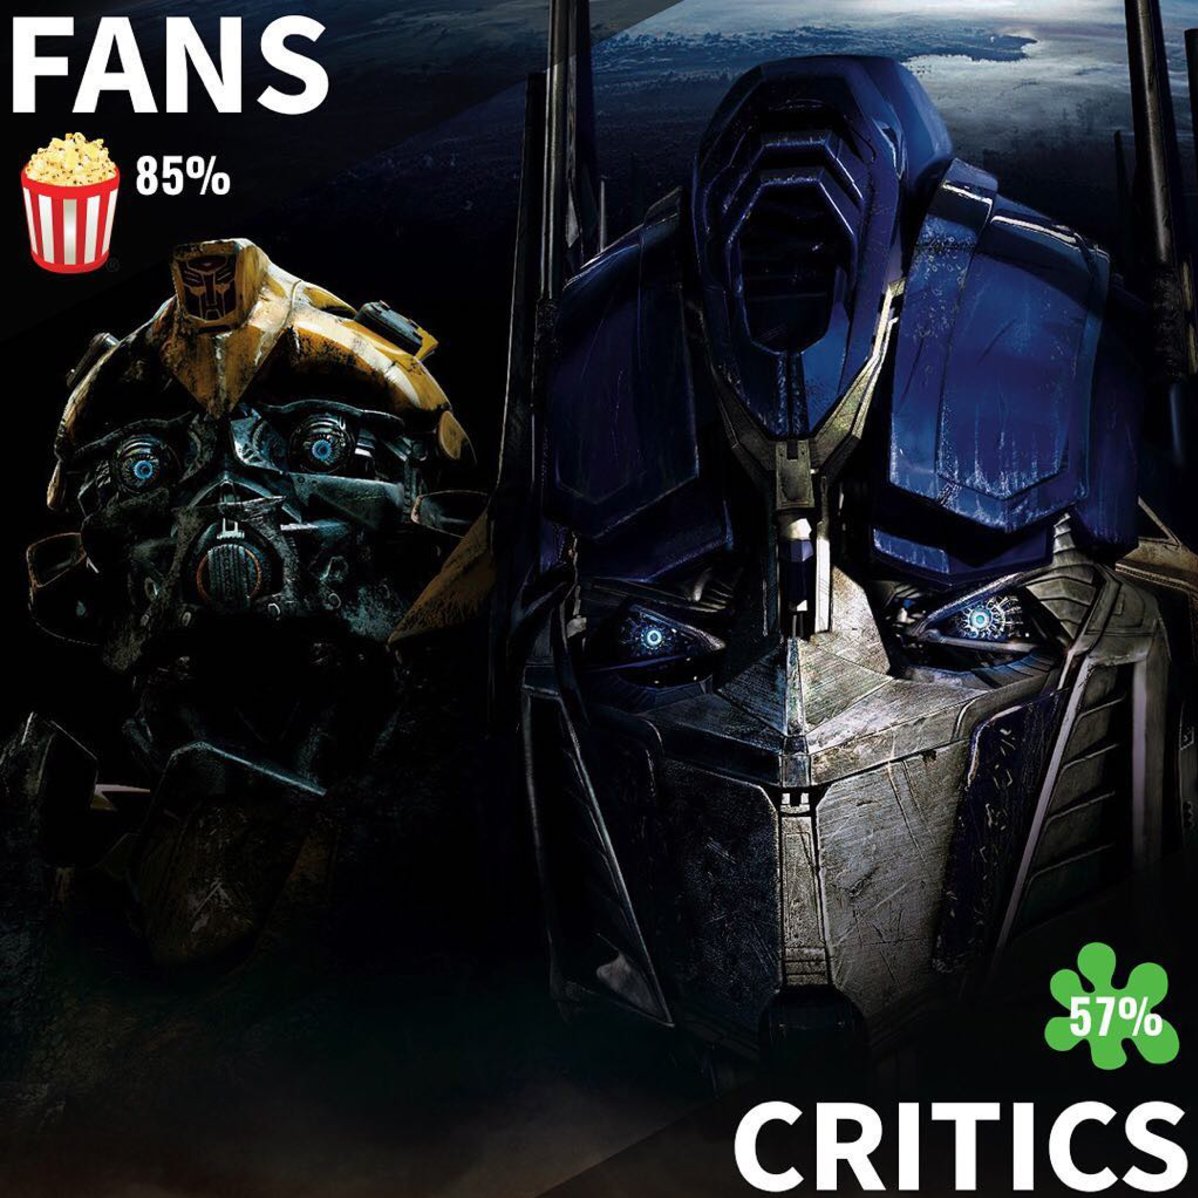 transformers rotten tomatoes